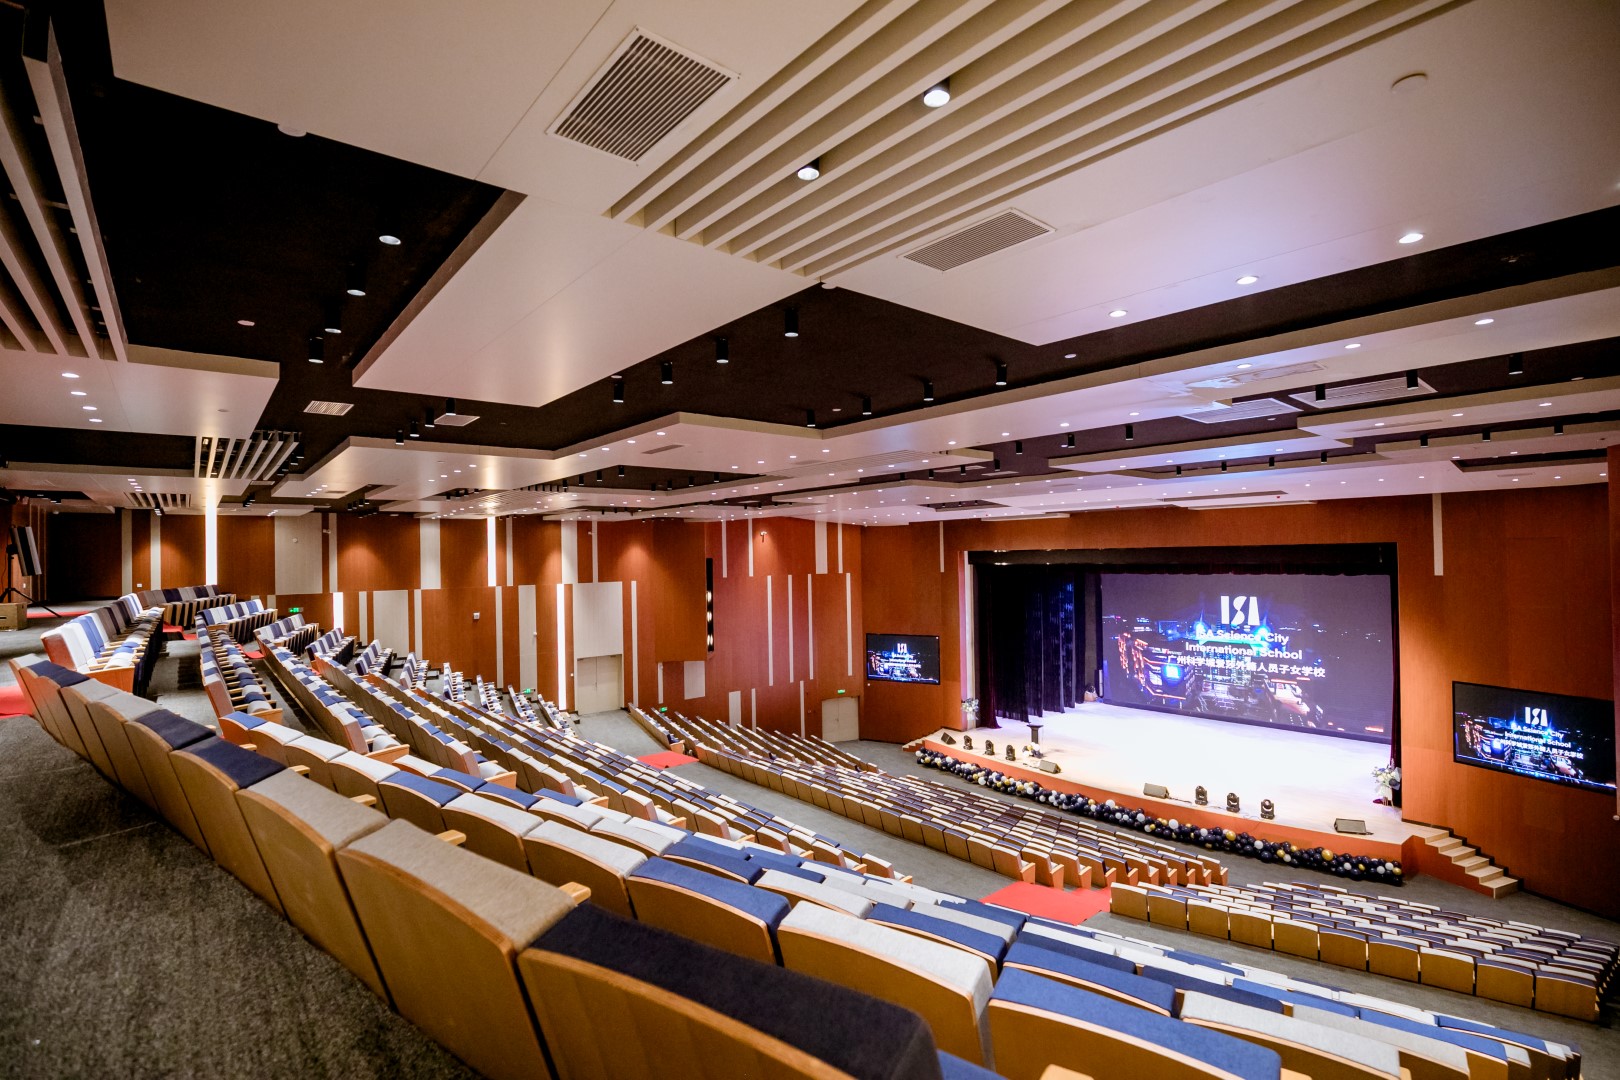 Lecture Hall, ISA Science City, Guangzhou, China